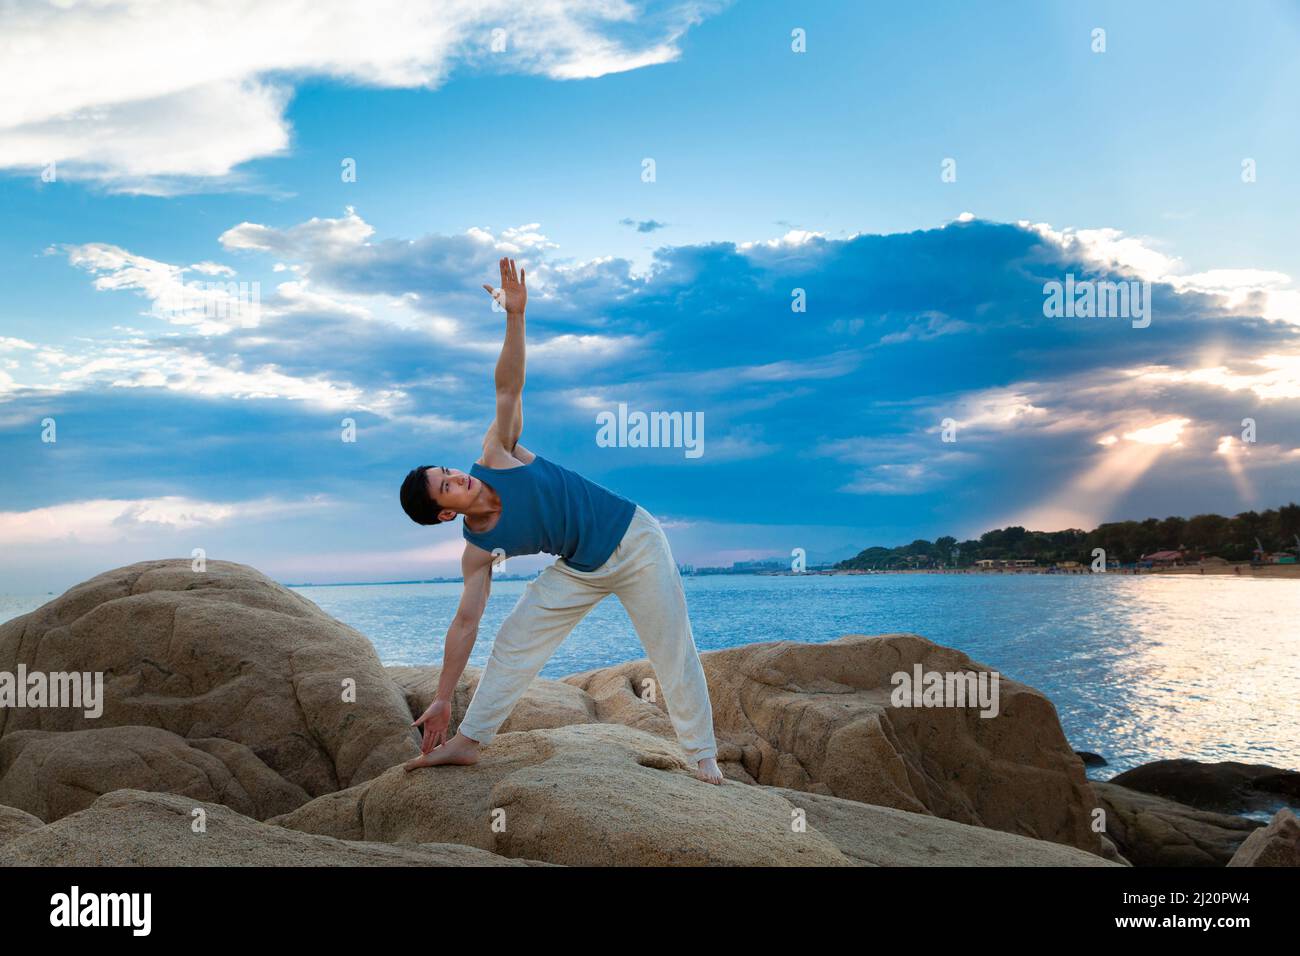 Muscular young man doing yoga on a beach rock - stock photo Stock Photo